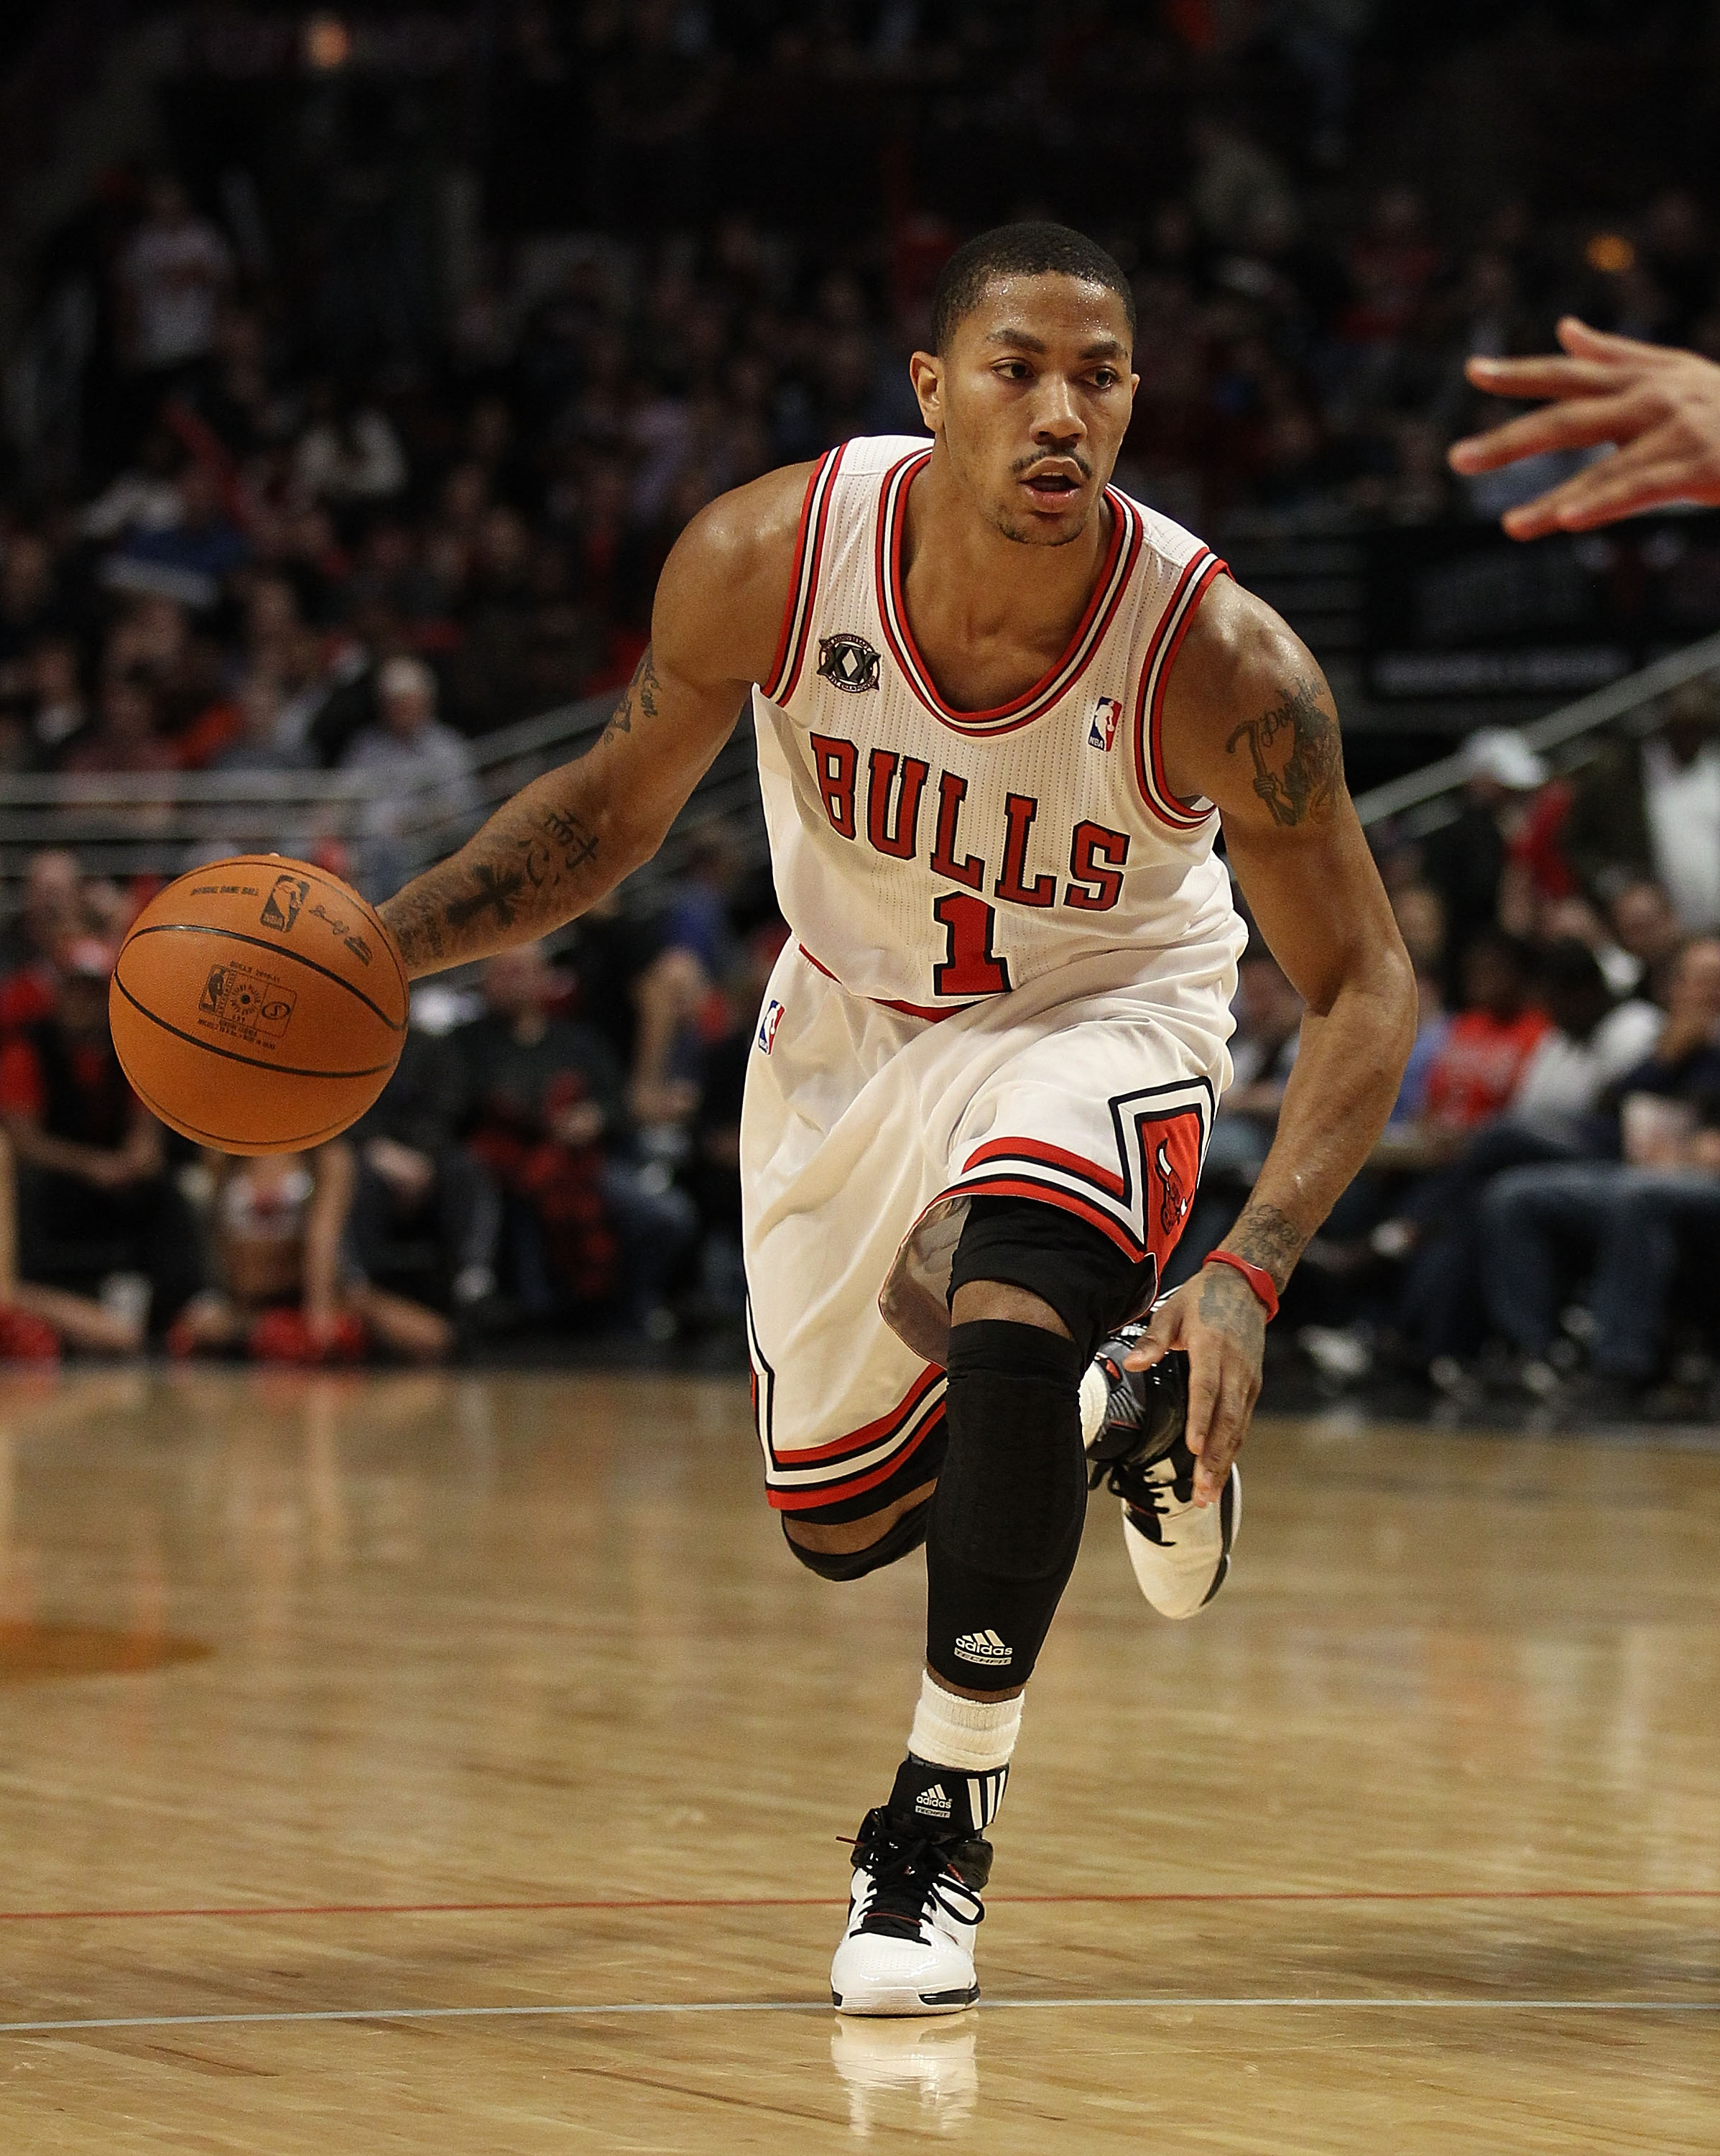 Chicago Bulls: 10 Reasons Derrick Rose and Co. Are Championship